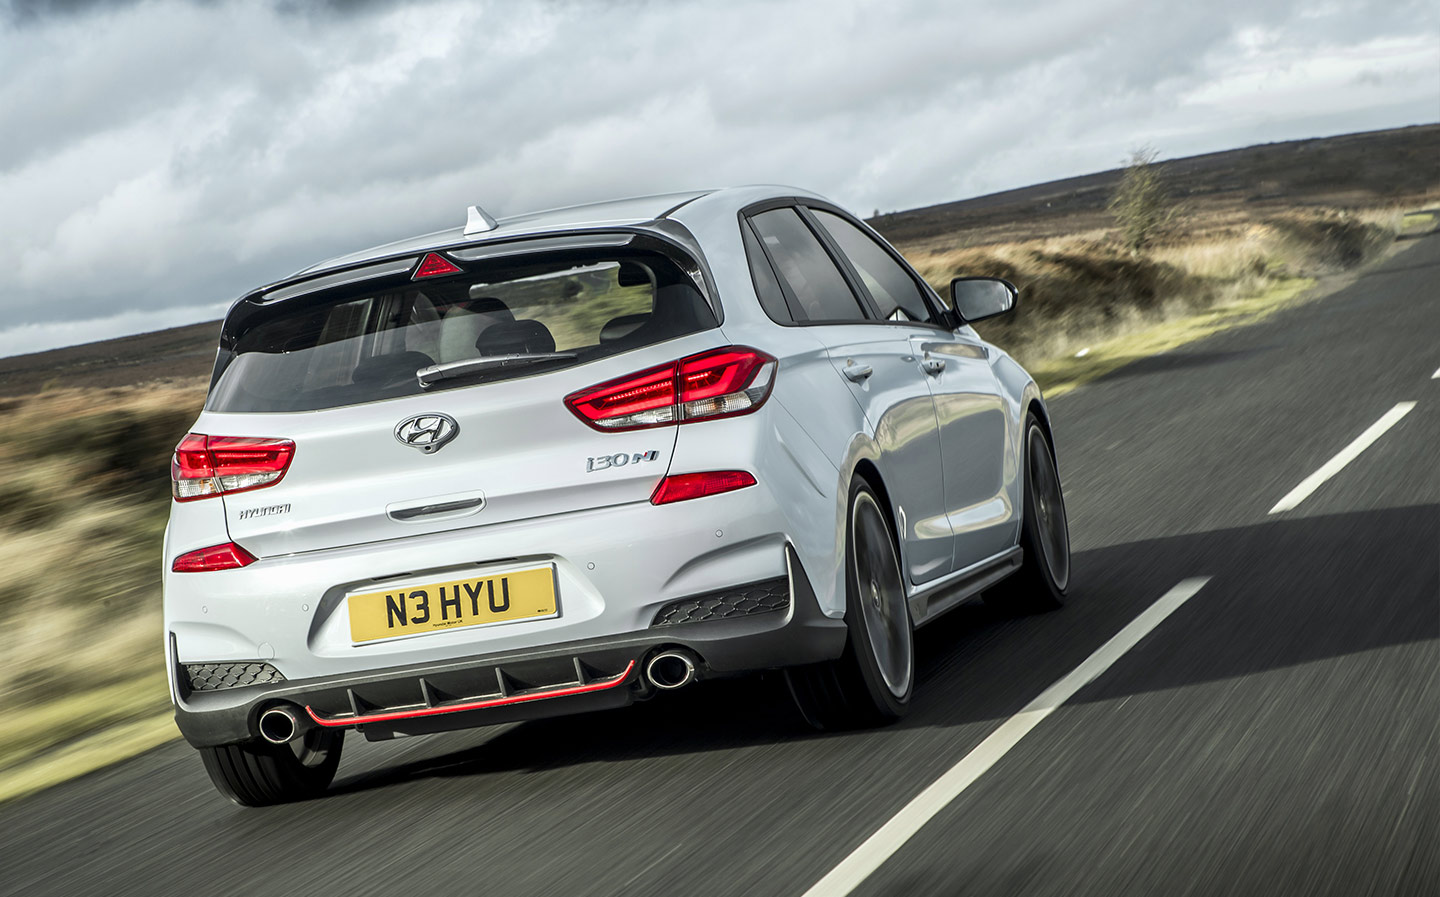 The Clarkson Review: 2017 Hyundai i30 N Performance